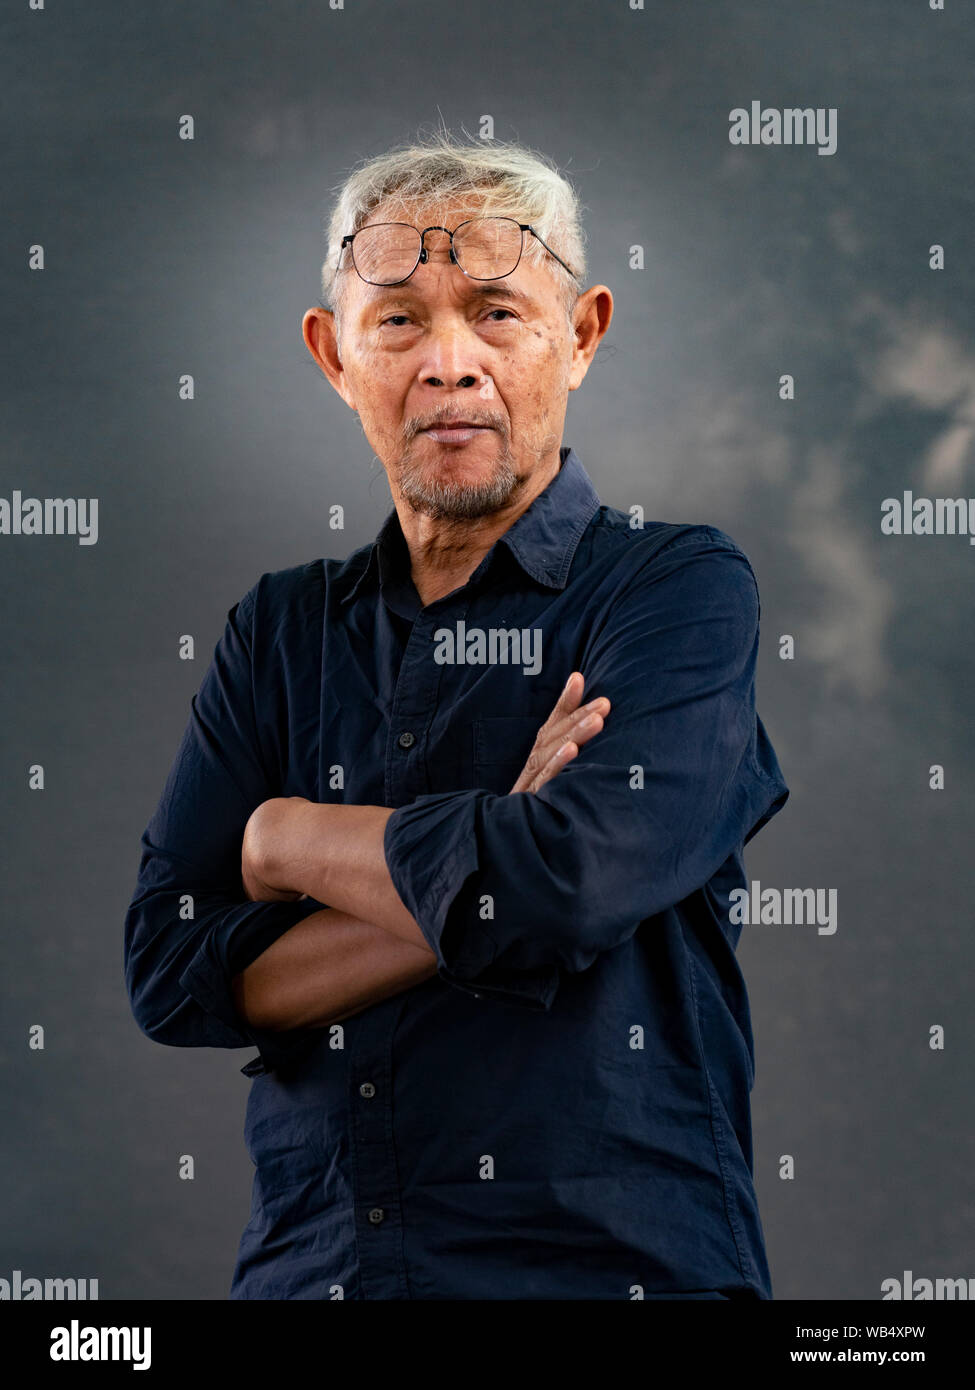 Edinburgh, Scotland, UK. 24th Aug, 2019. Goenawan Mohamad. Goenawan Mohamad is a legend in Indonesia. A poet, essayist, playwright and editor, his decades of work amount to an incredible body of fiction and non-fiction. Credit: Iain Masterton/Alamy Live News Stock Photo